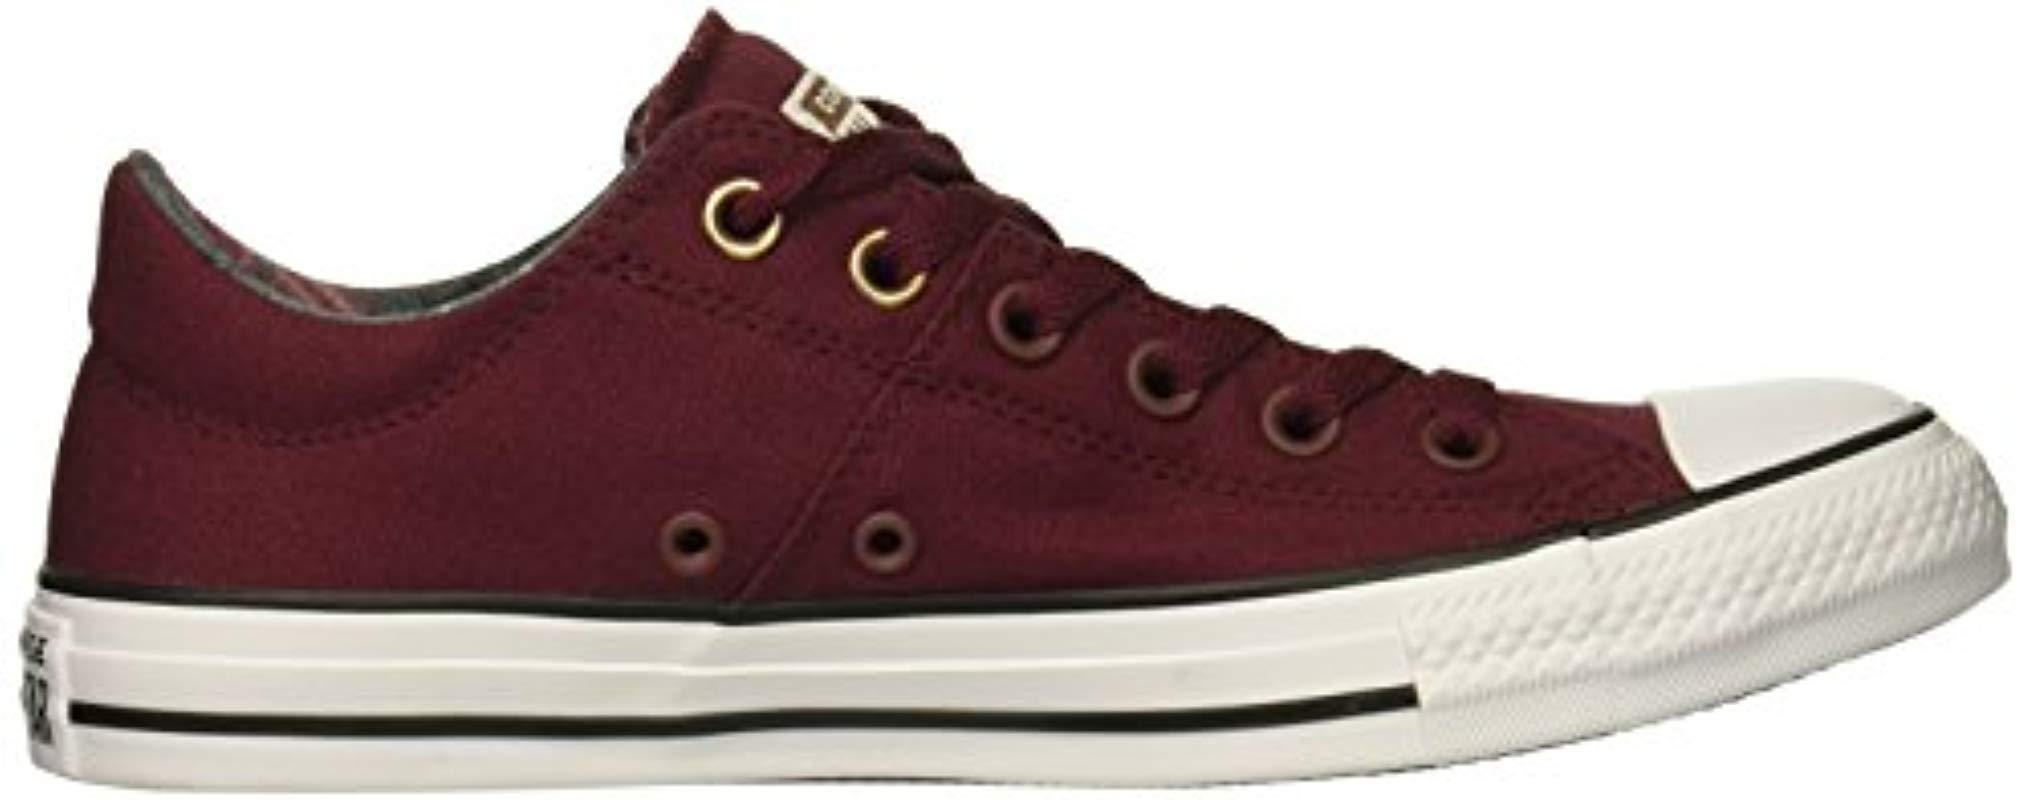 Converse Chuck Taylor All Star Plaid Lined Madison Low Top Sneaker, Dark  Burgundy/white, 7 M Us | Lyst